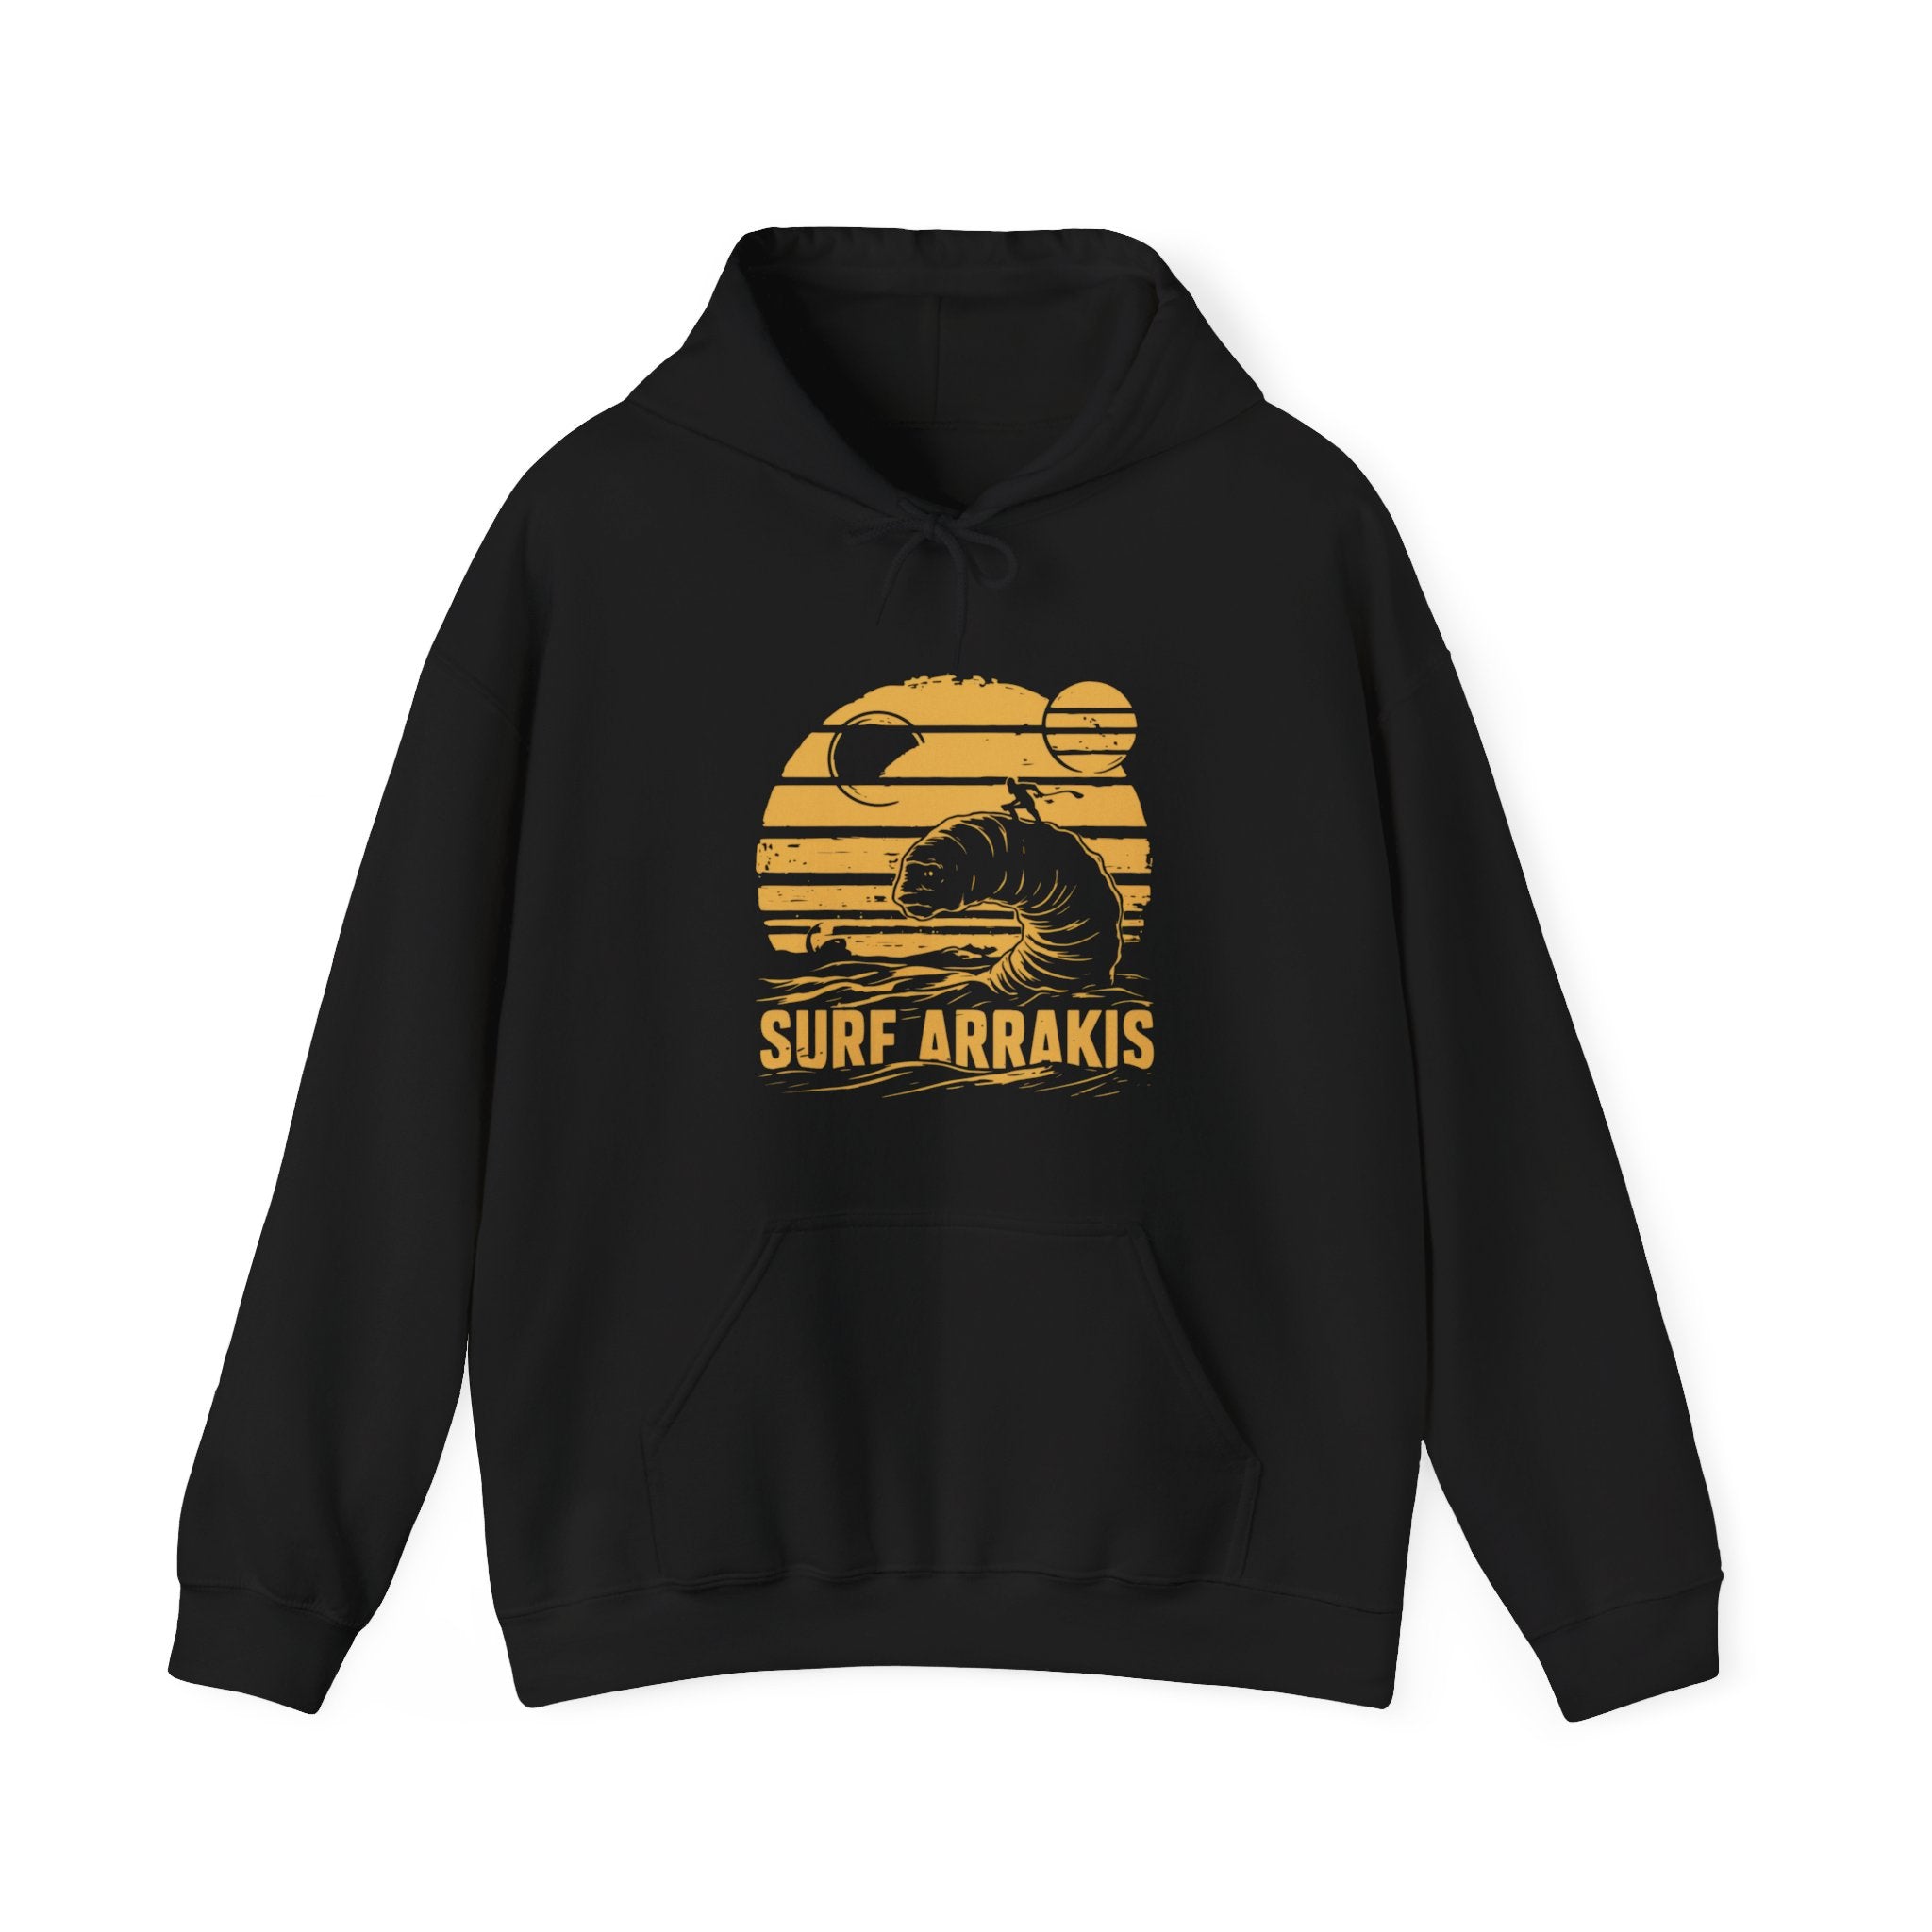 The "Surf Arrakis - Hooded Sweatshirt" features a black exterior with a golden graphic of a sandworm and the text "Surf Arrakis" on the front, complemented by a cozy interior that promises comfort.